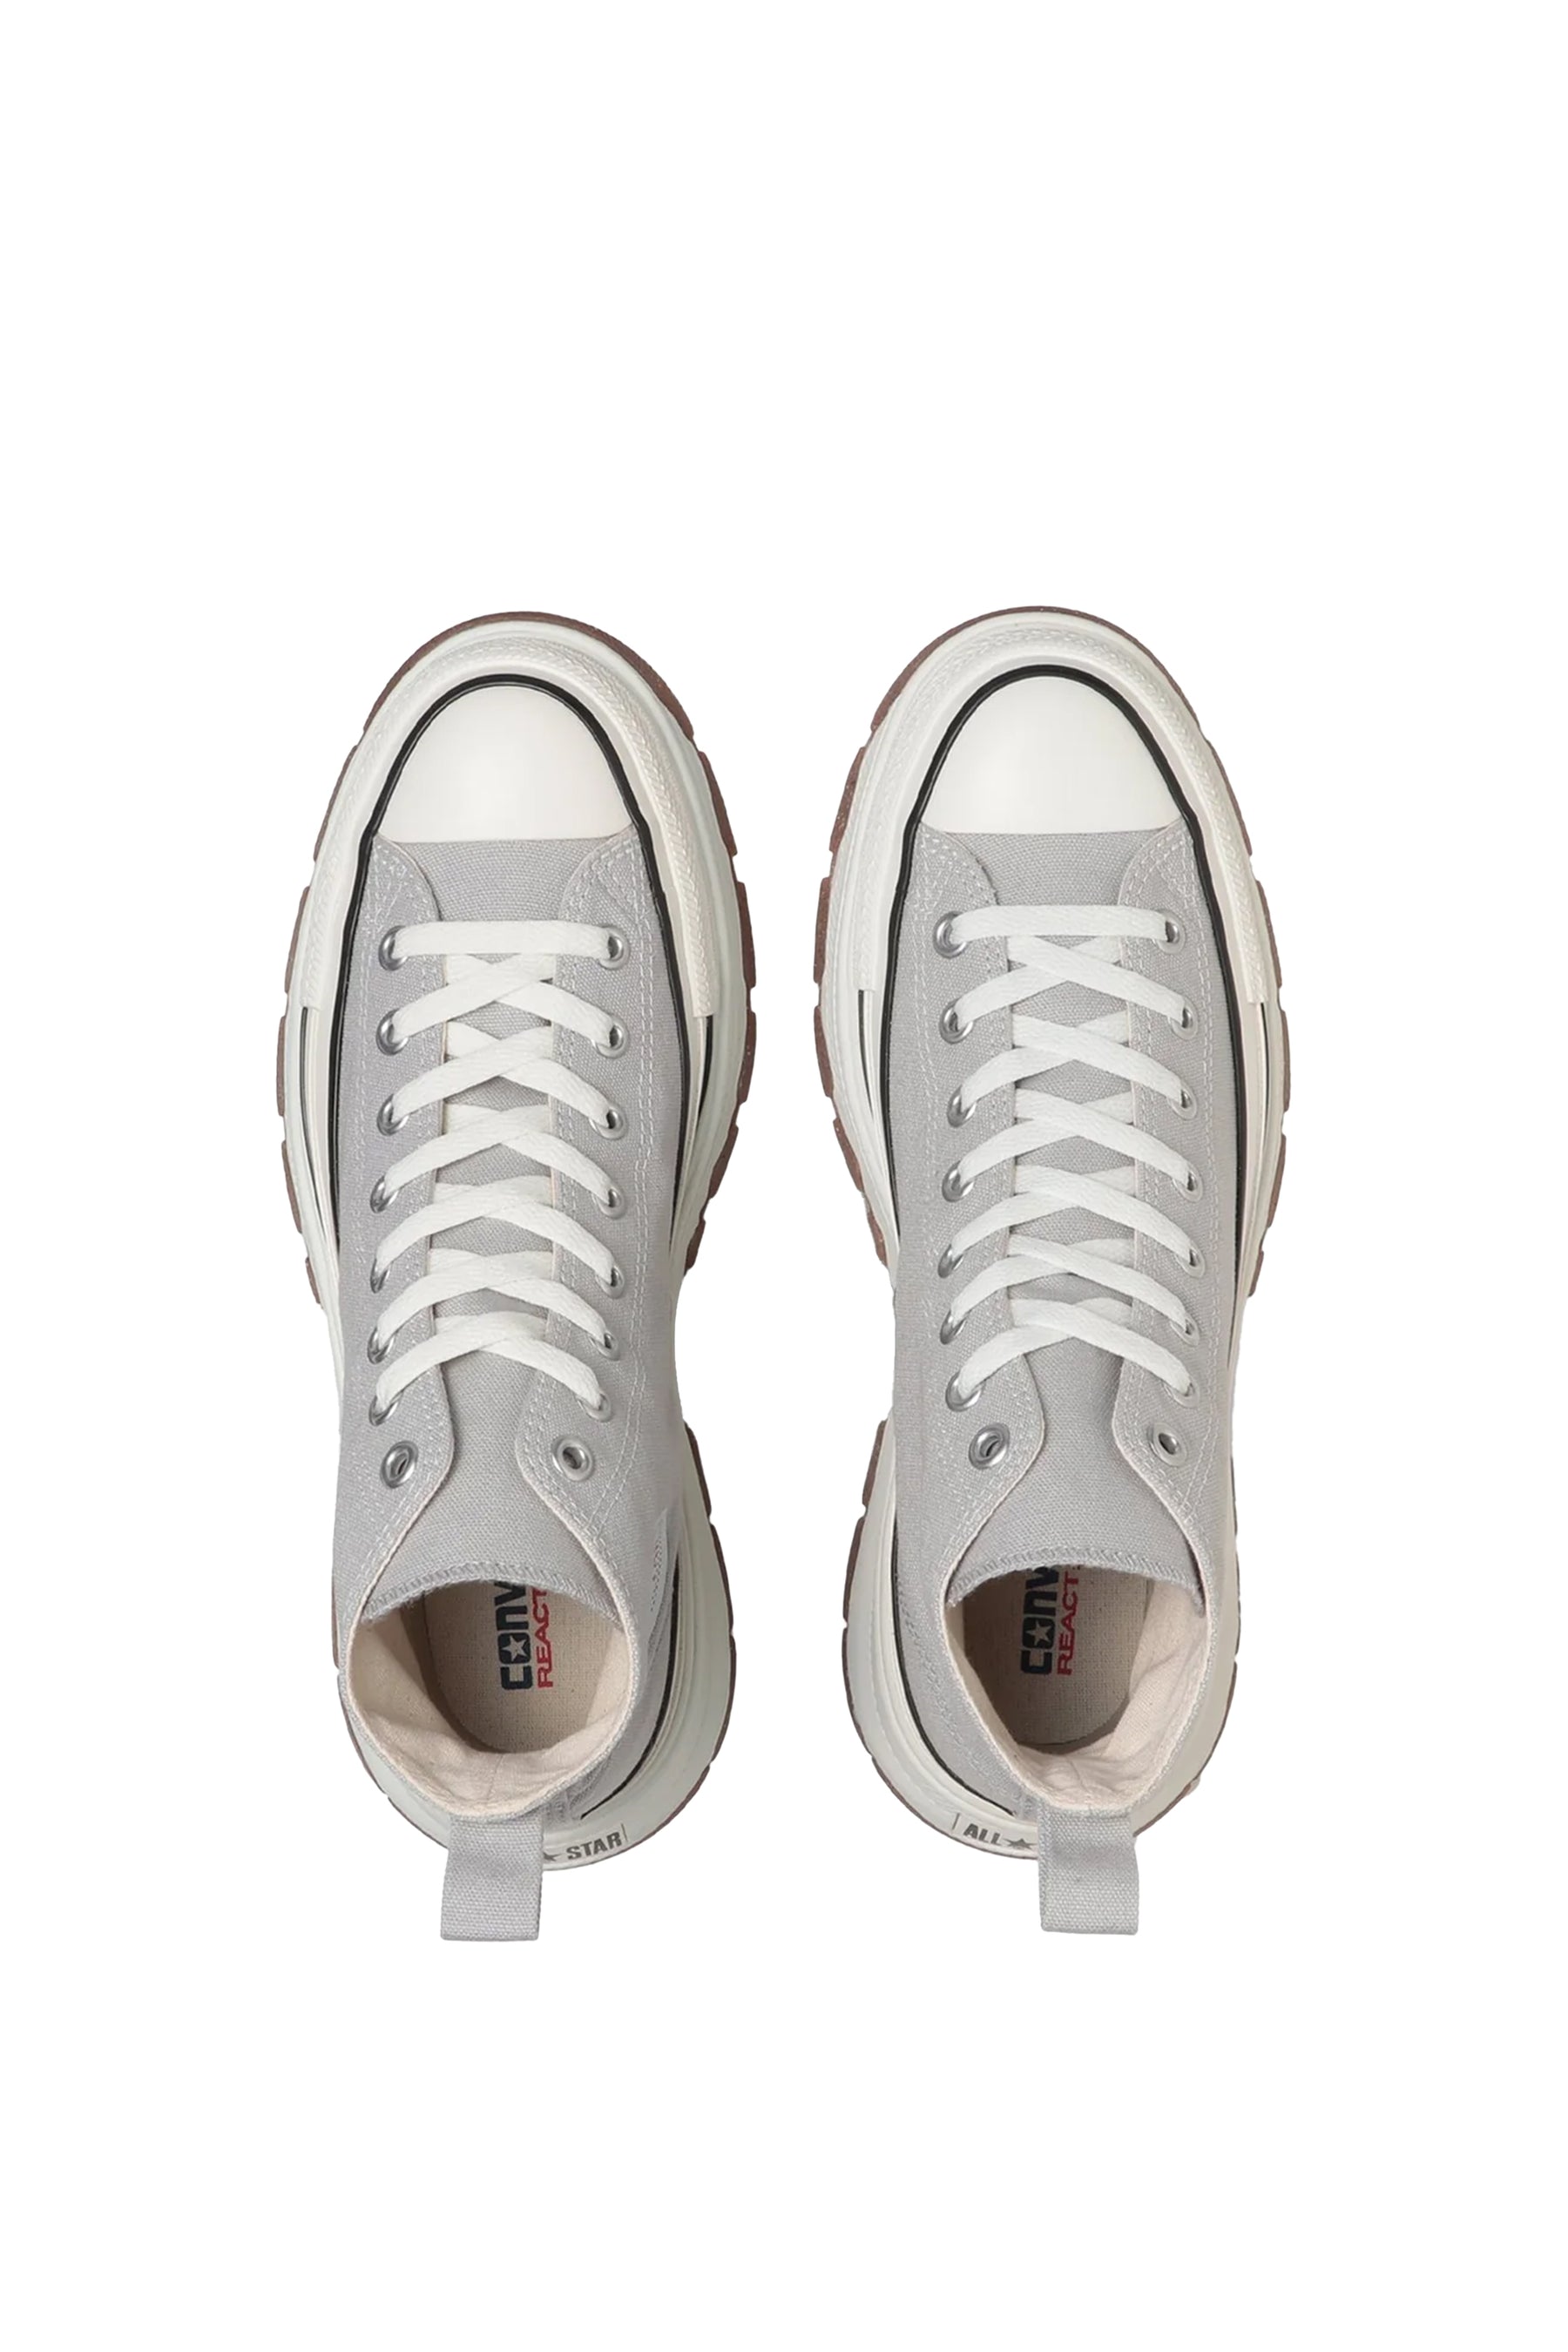 CONVERSE SS23 ALL STAR TREKWAVE HI / ICE GRY -NUBIAN